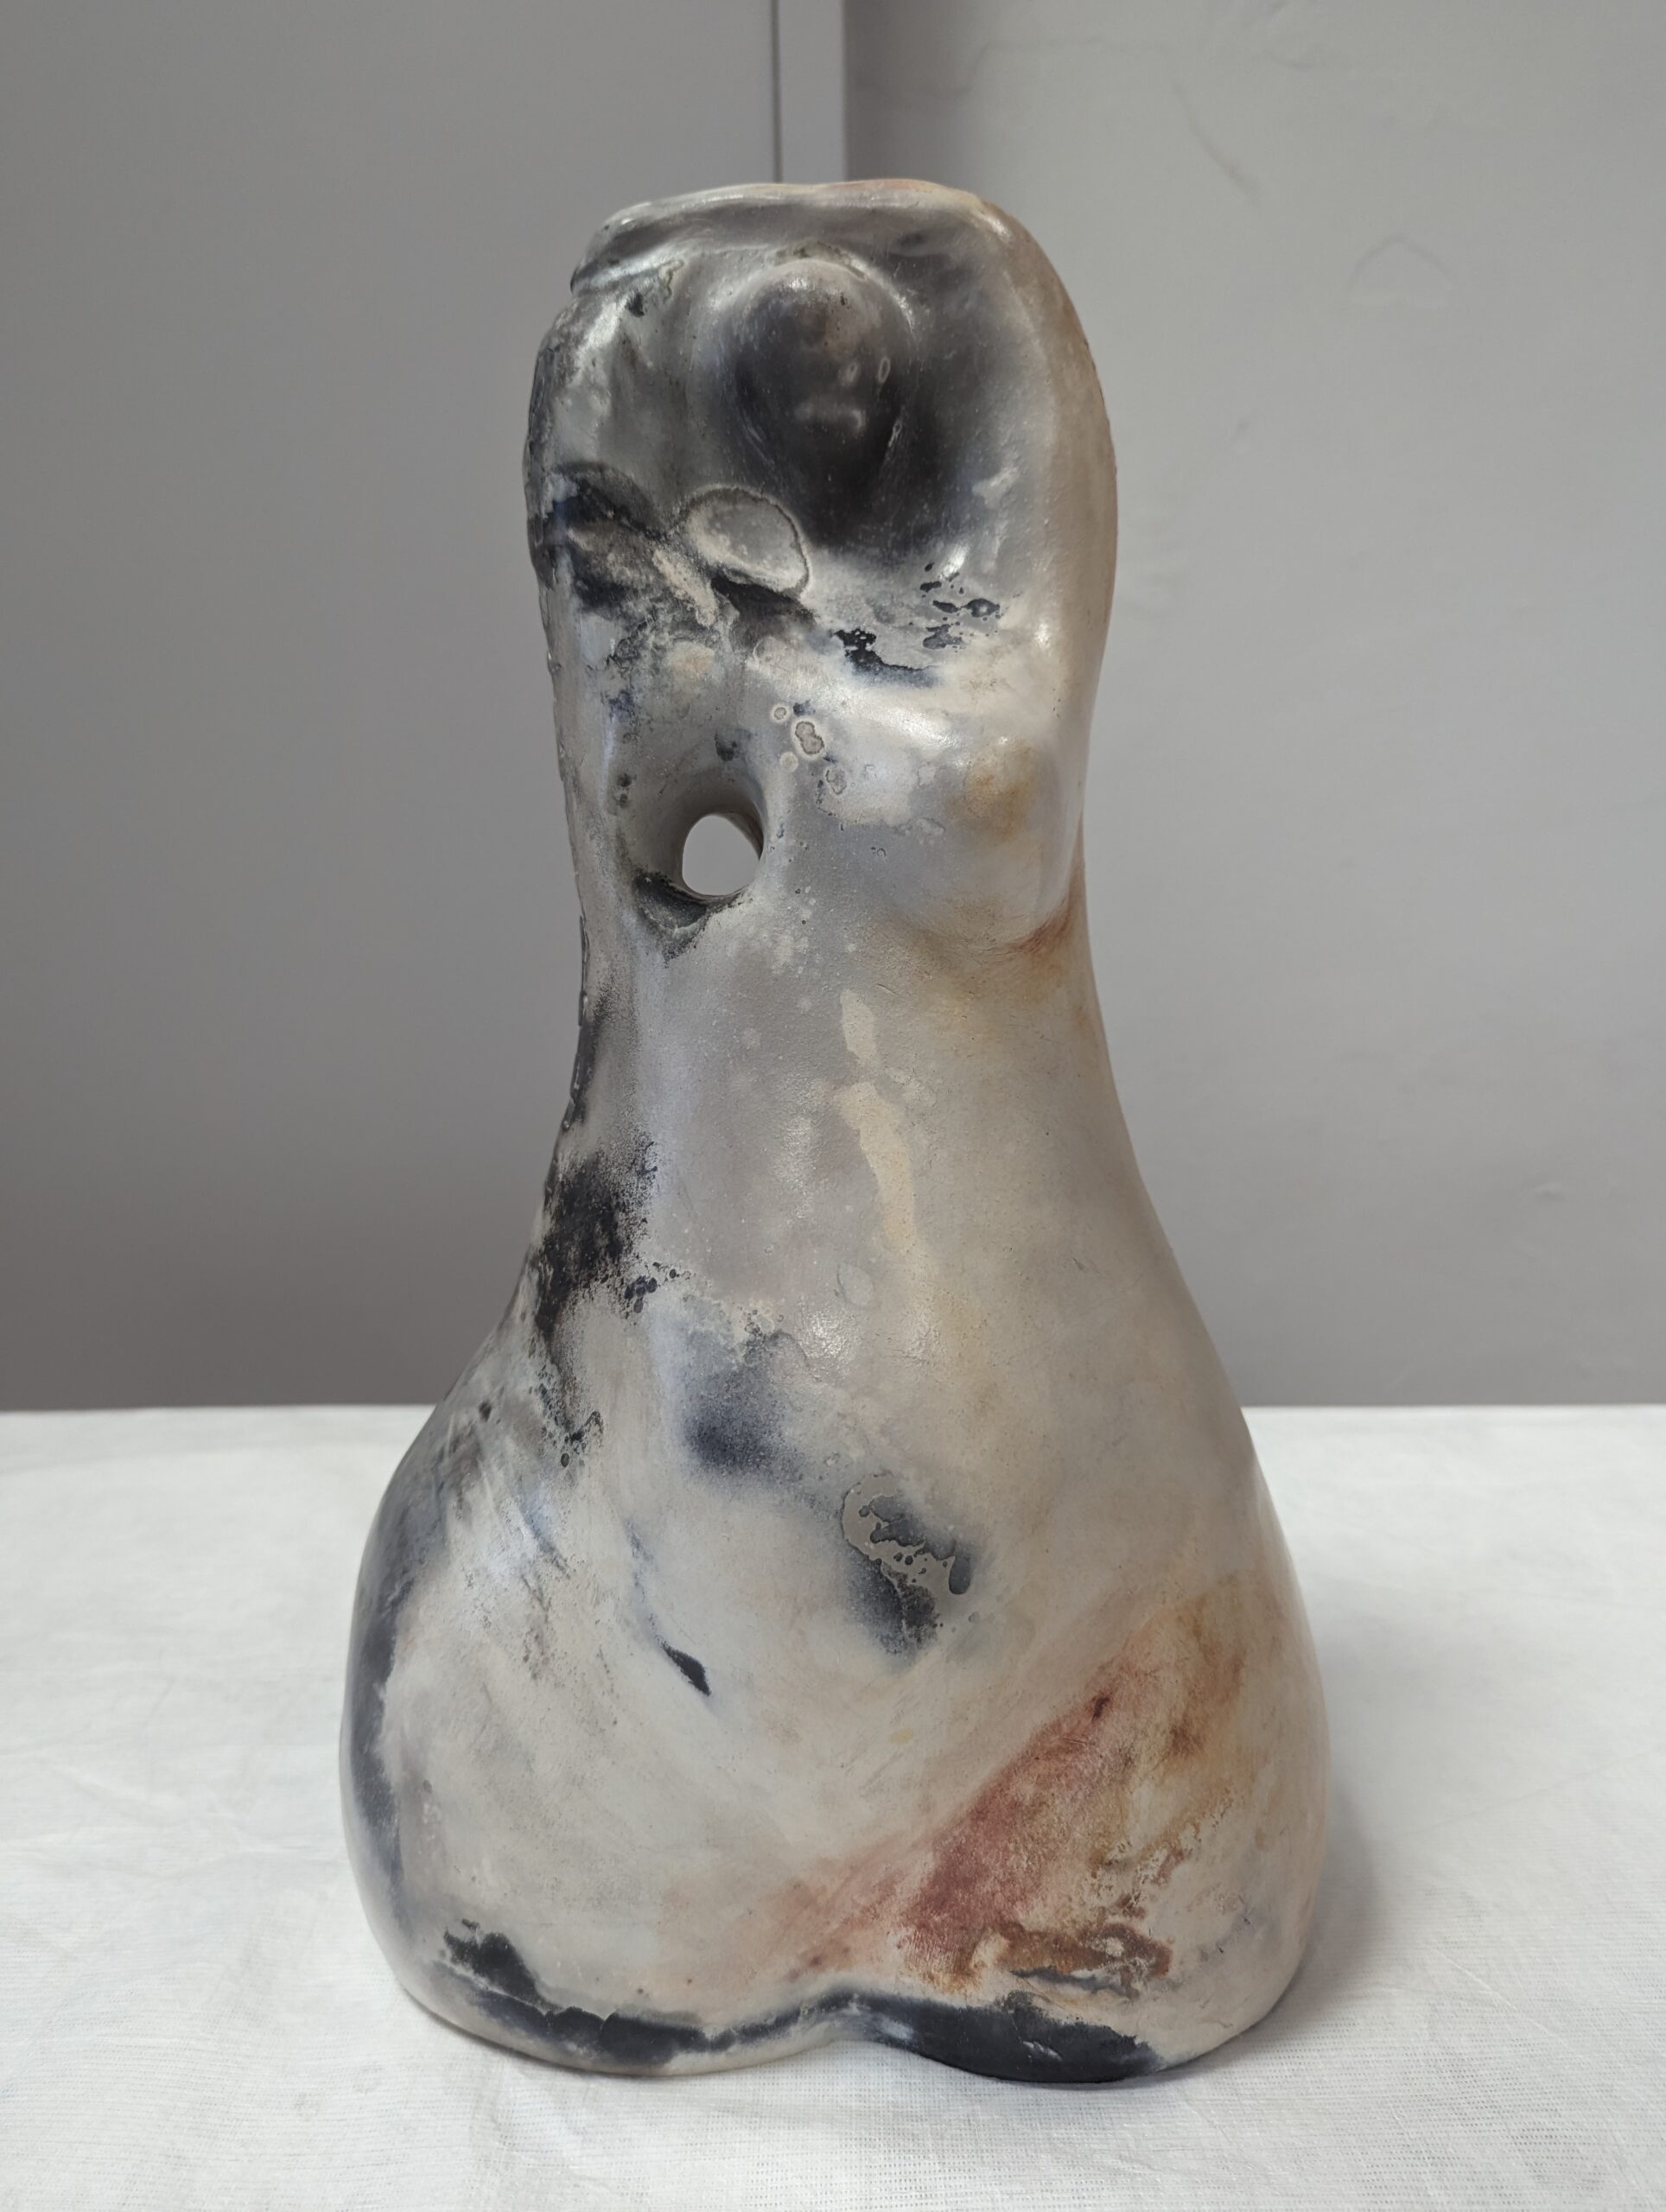 Image of a pottery work by Christine Cherry.